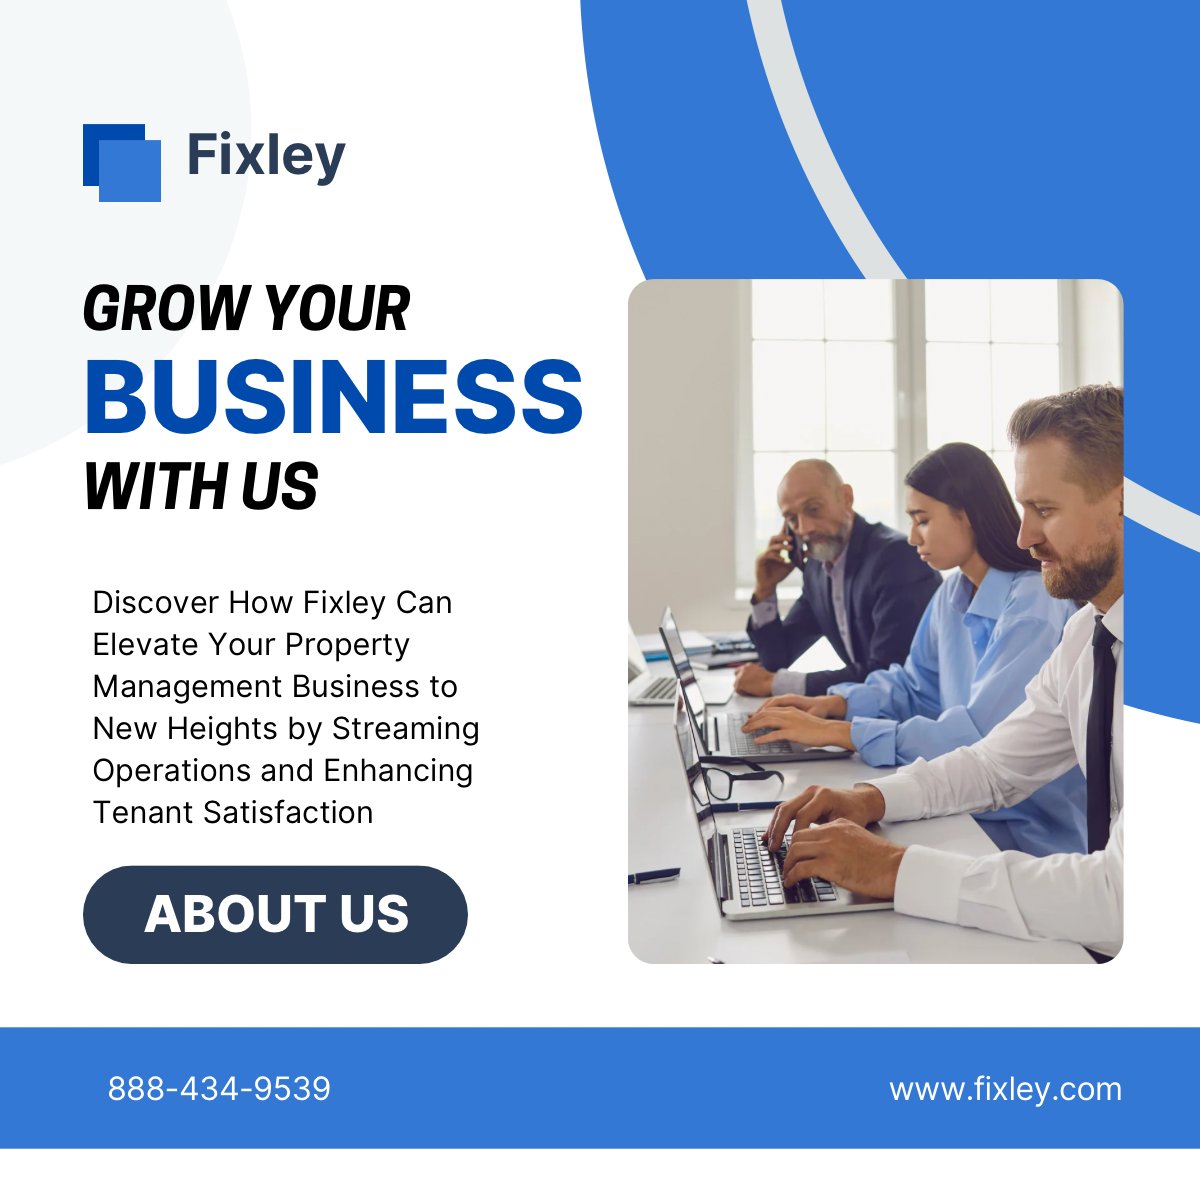 Are you a Property Manager wanting to Grow Your Portfolio?

Learn more at fixley.com 

#propertymanagement #realestate #Maintenance